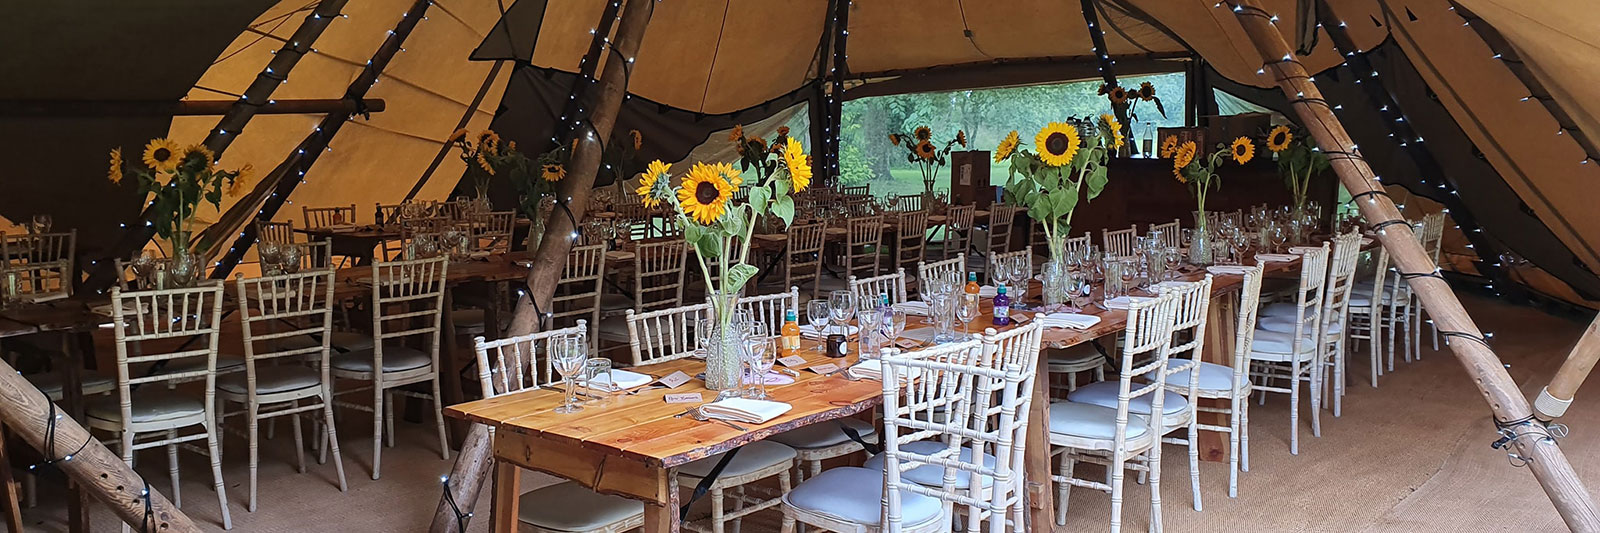 Tables dressed for a function with sunflowers in vases